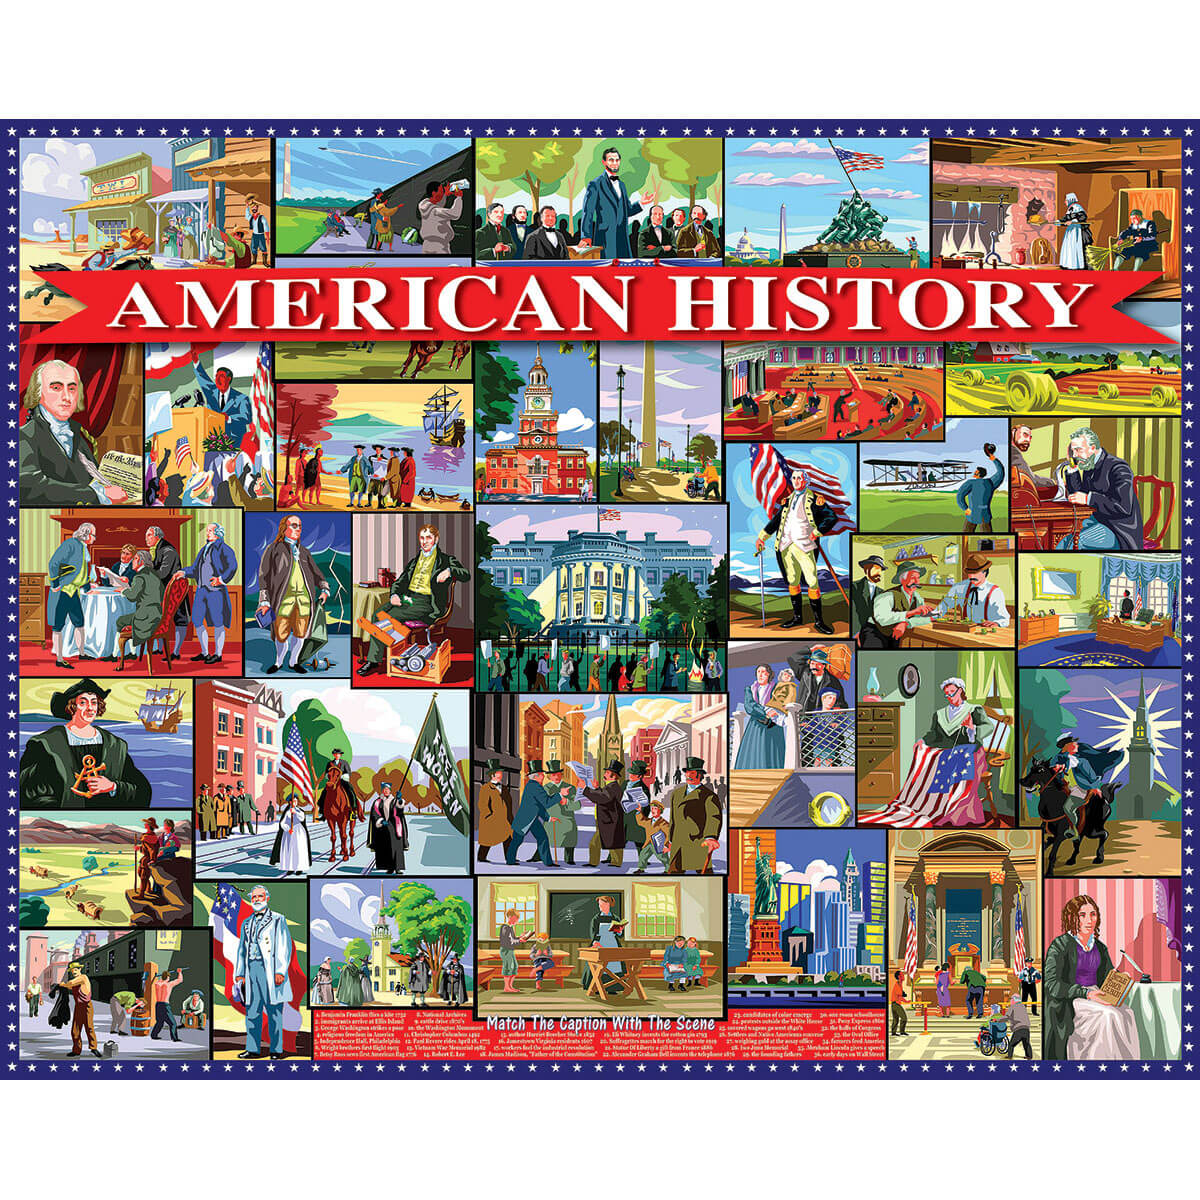 White Mountain Puzzles American History 1000 Piece Jigsaw Puzzle